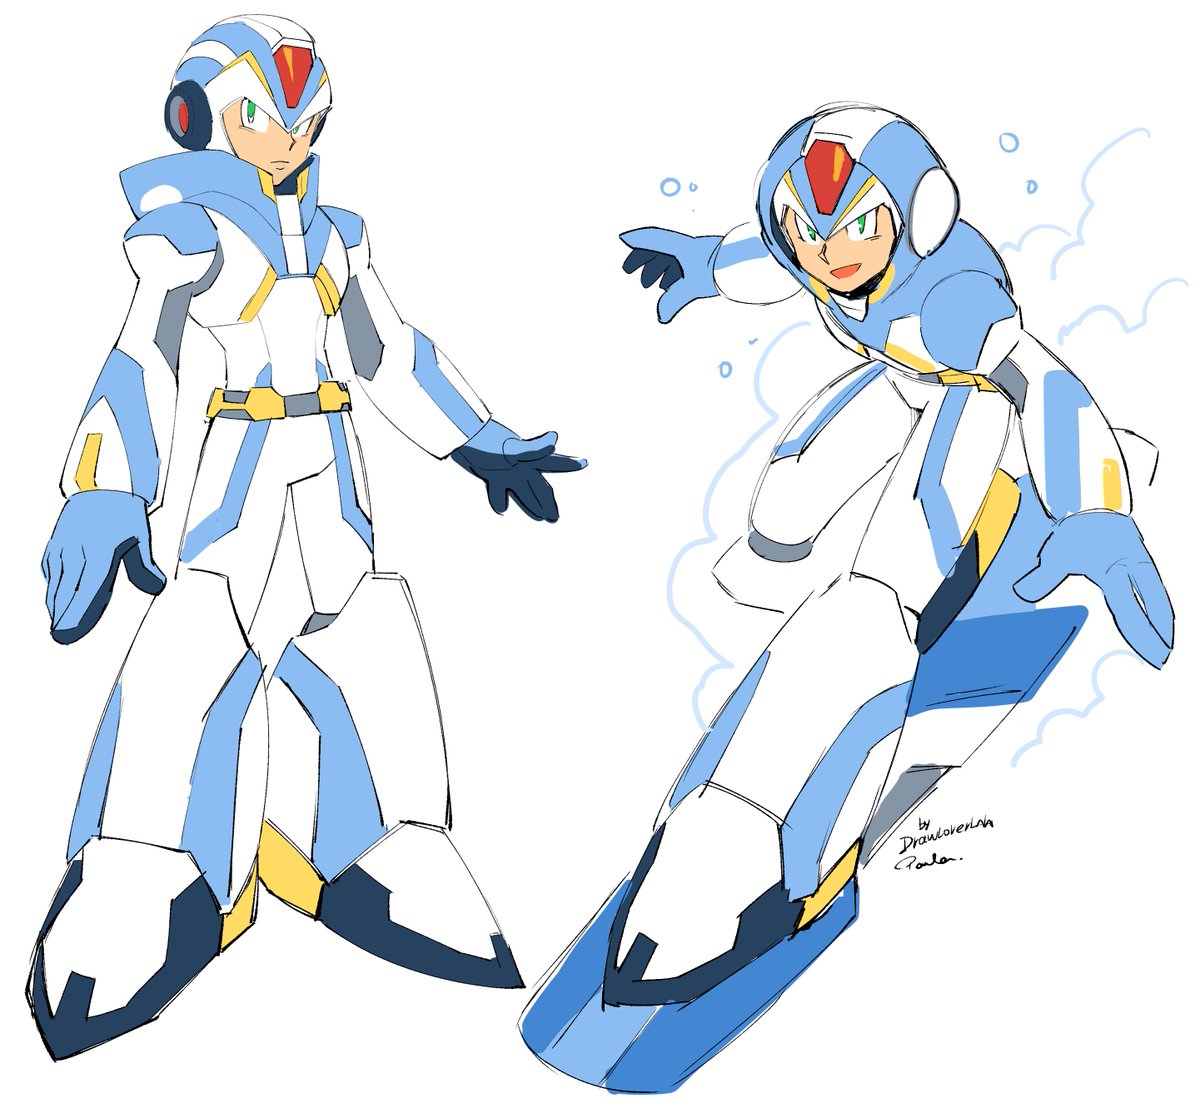 「Just a little armor design for fun.Frost」|Pamela Ojedaのイラスト